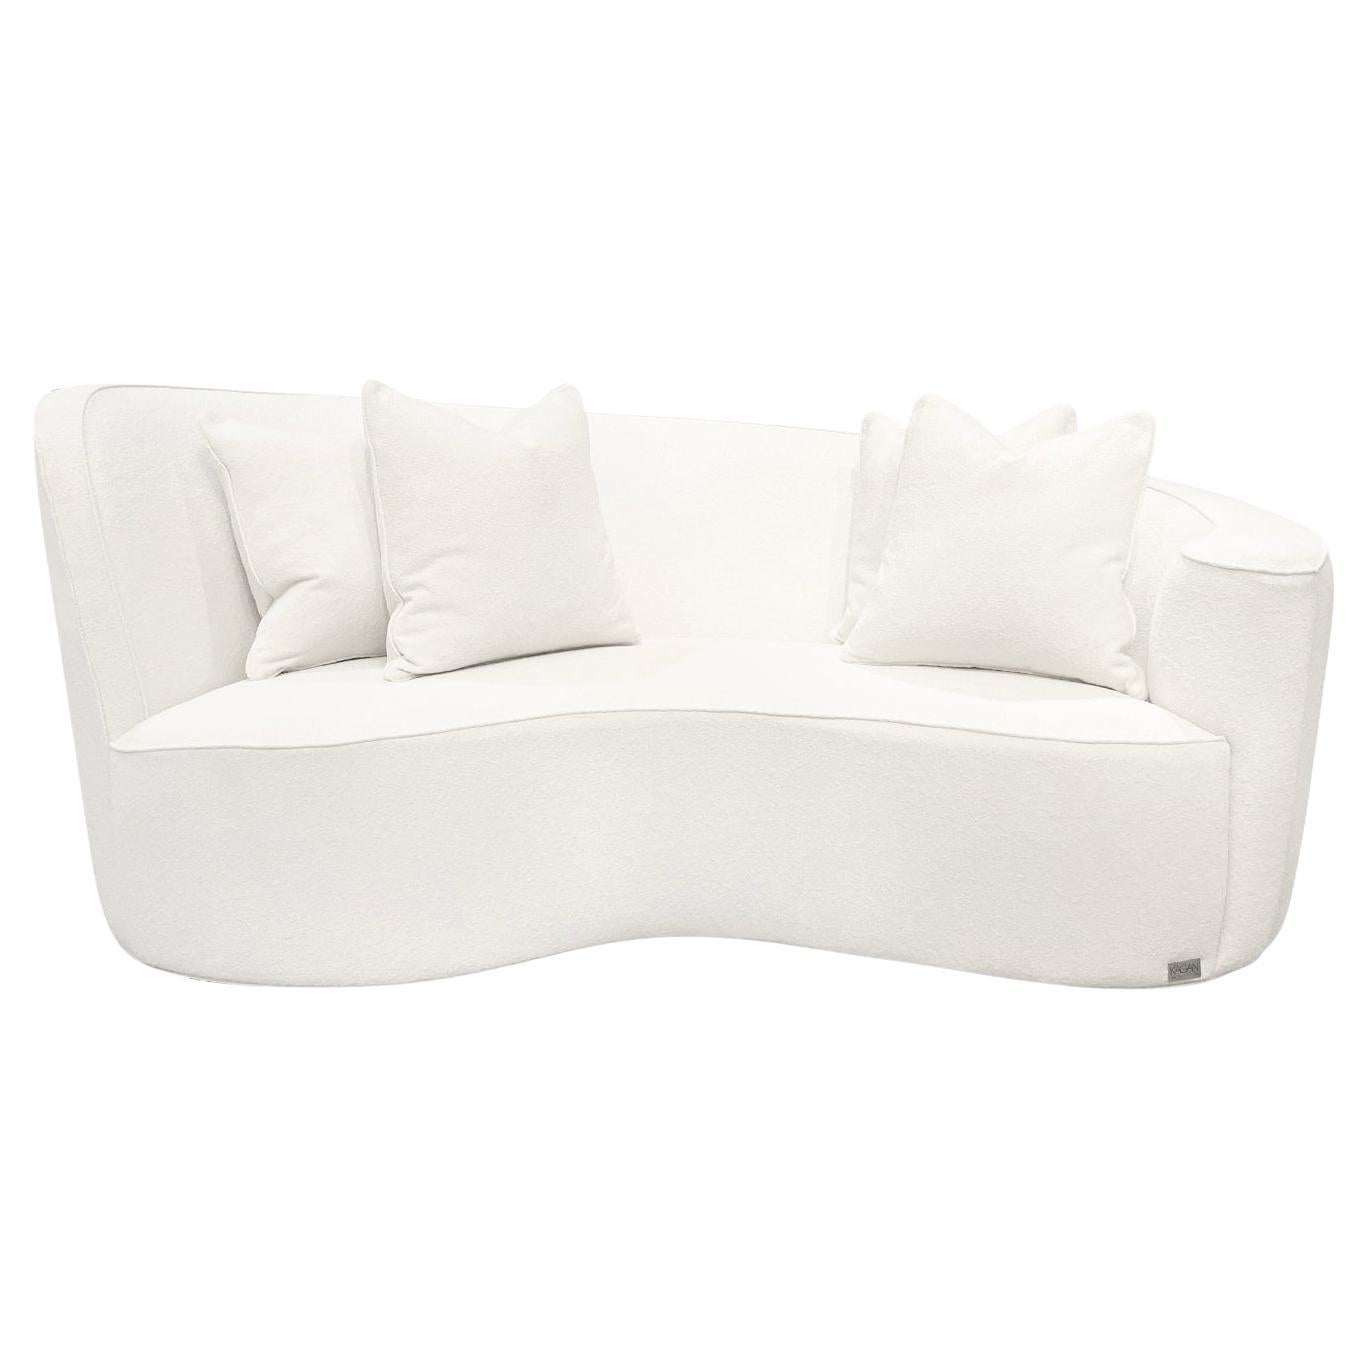 20th Century White American Four Seater Sofa - Vintage Settee by Vladimir Kagan For Sale